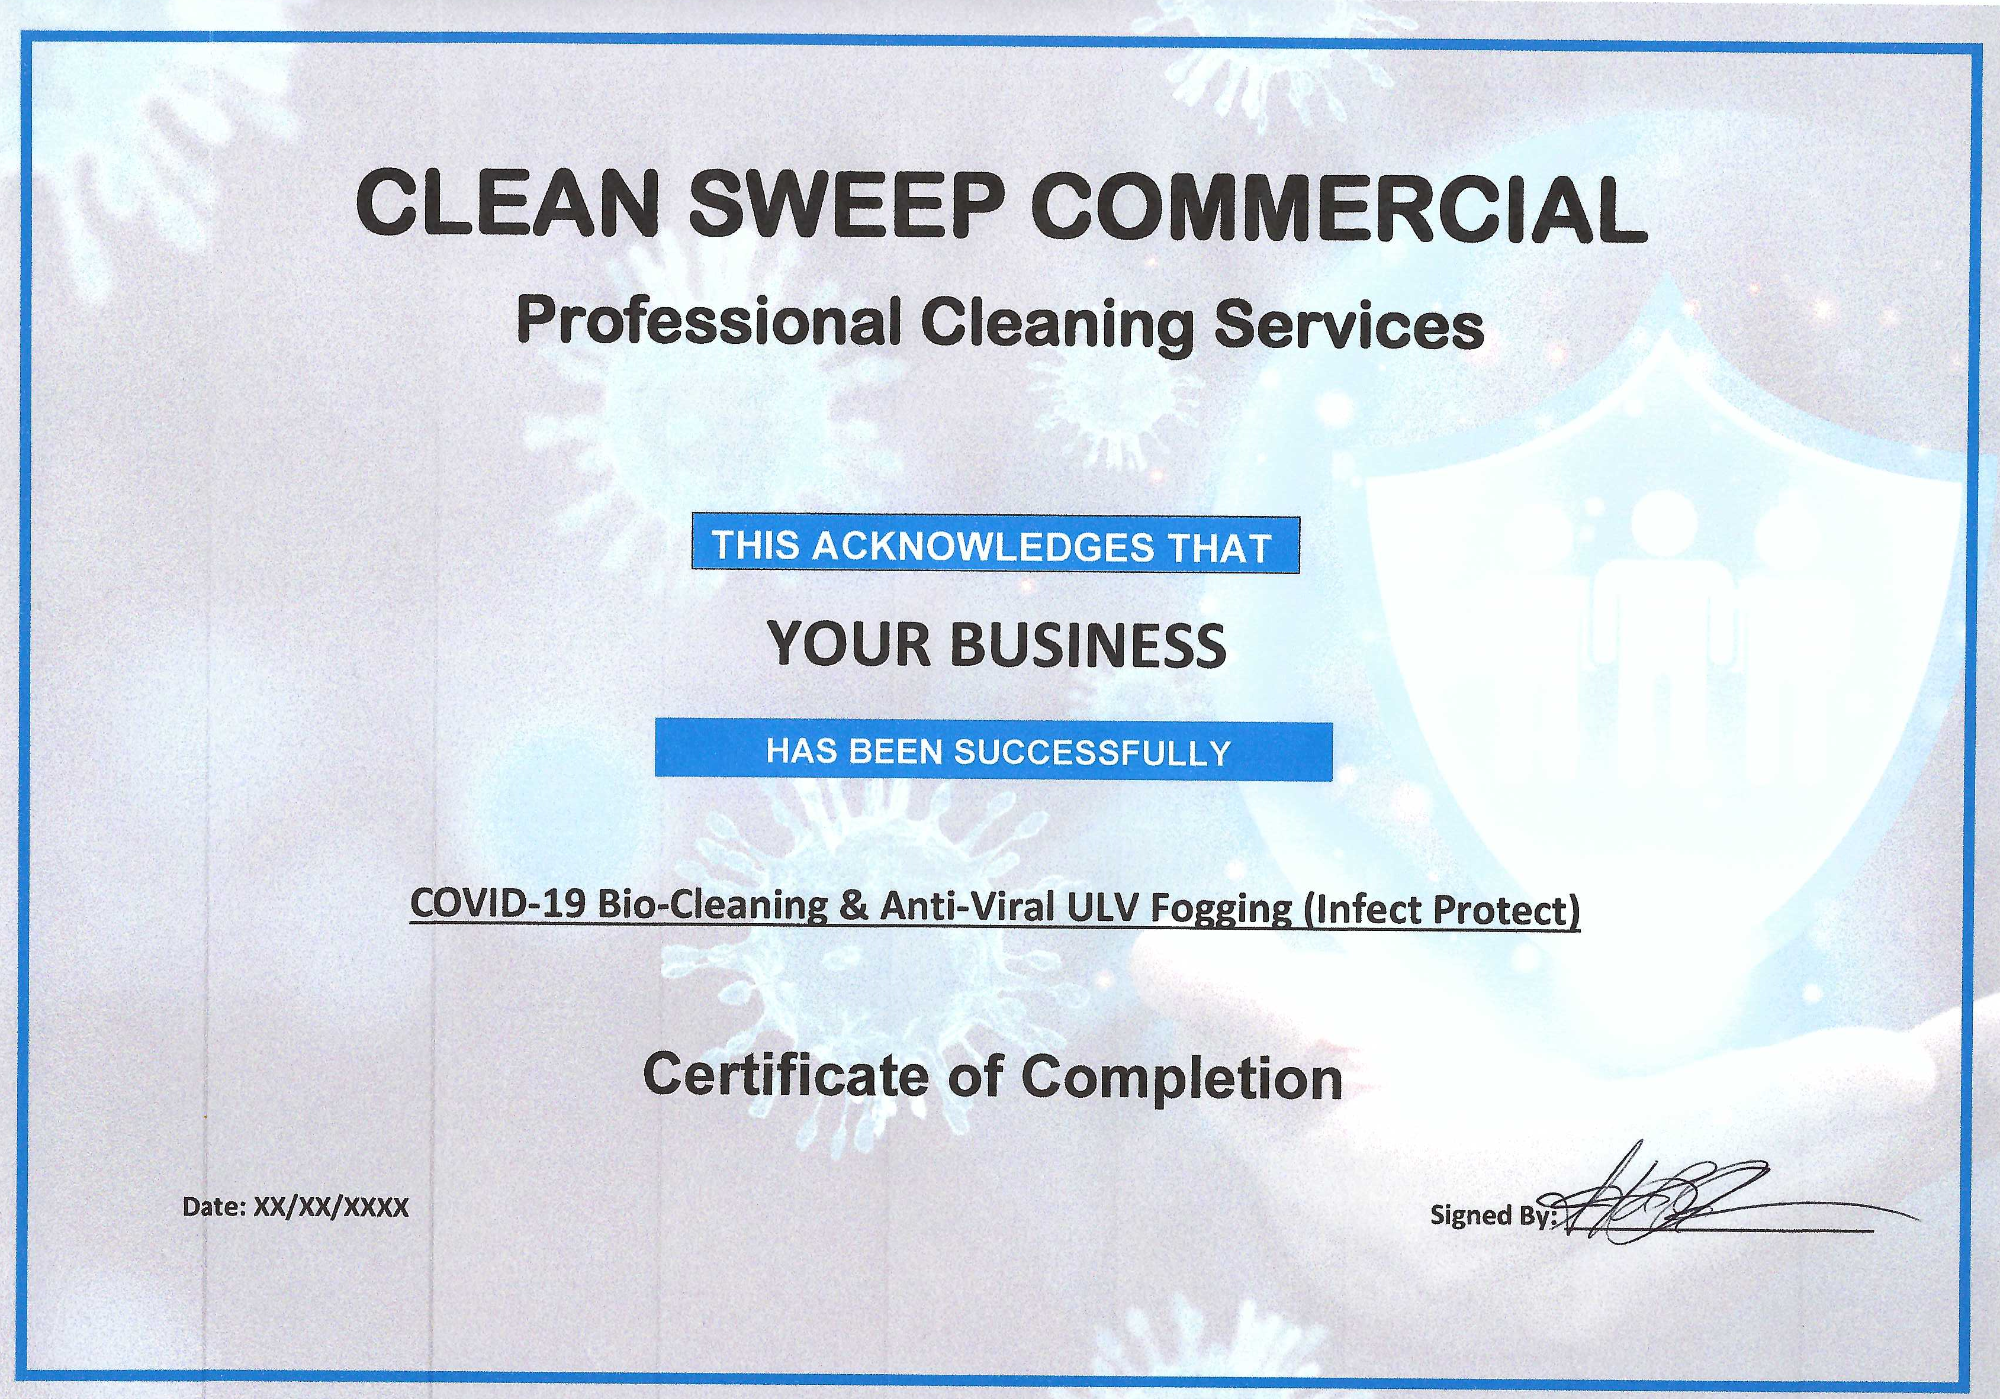 cleansweep-commercial-certificate-completition